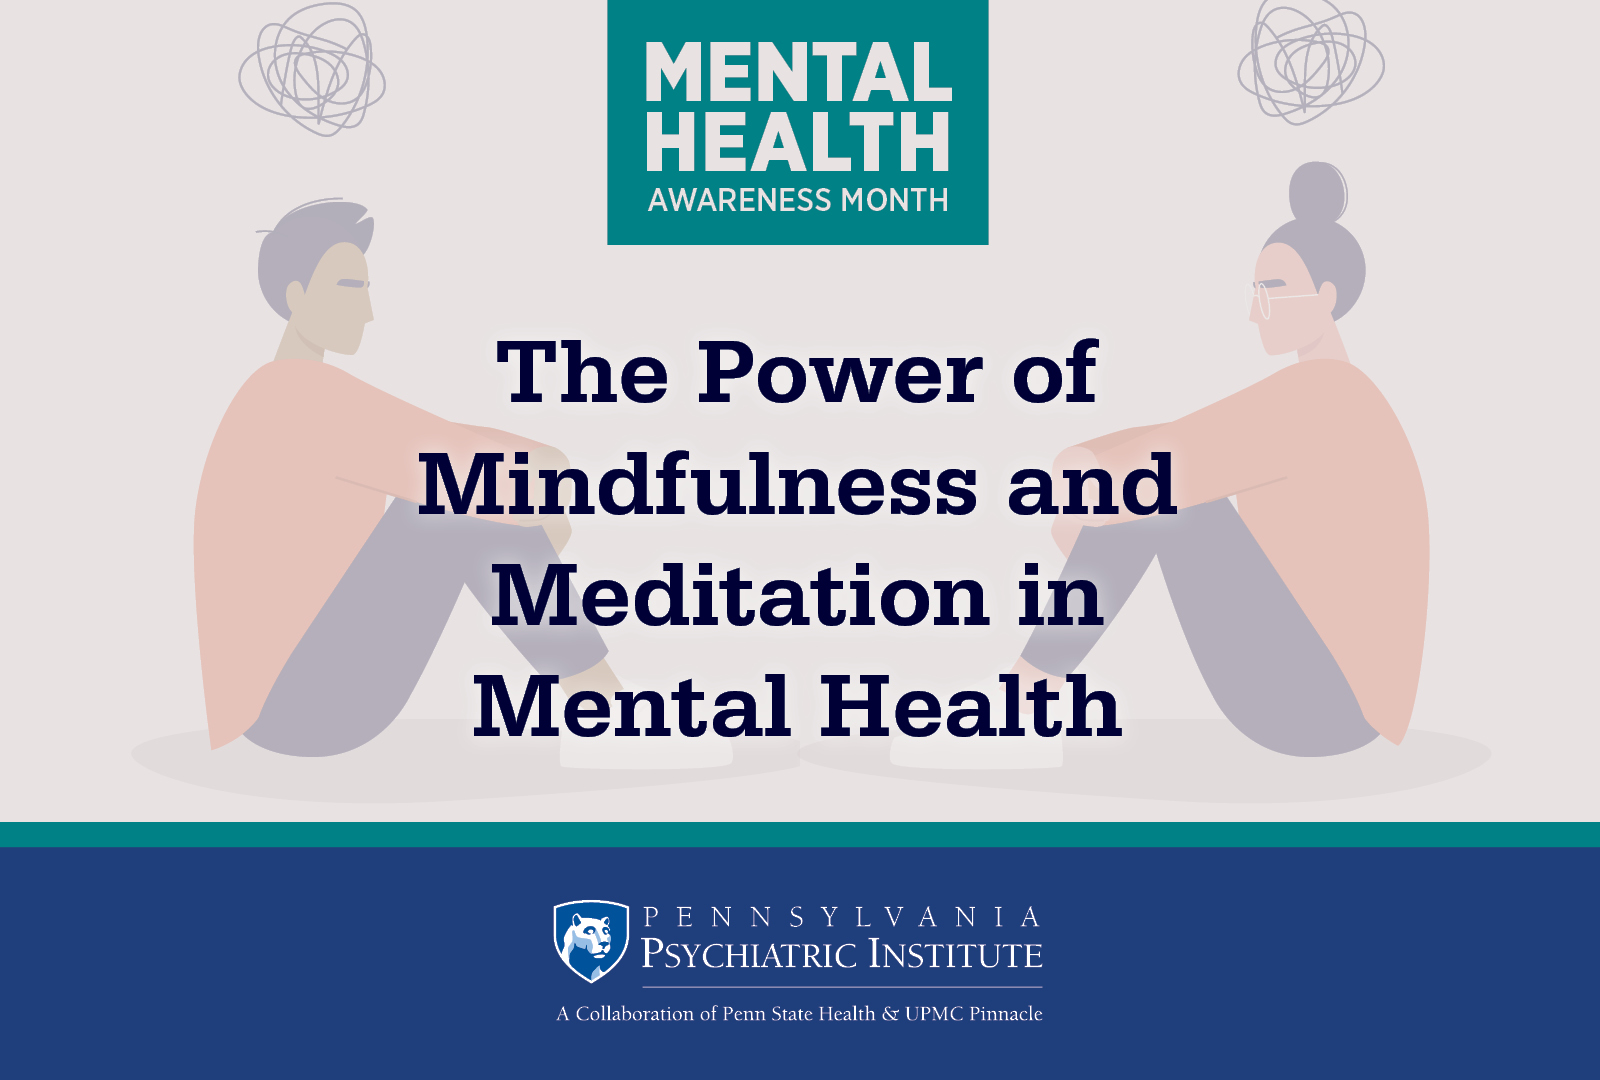 The Power of Mindfulness and Meditation in Mental Health